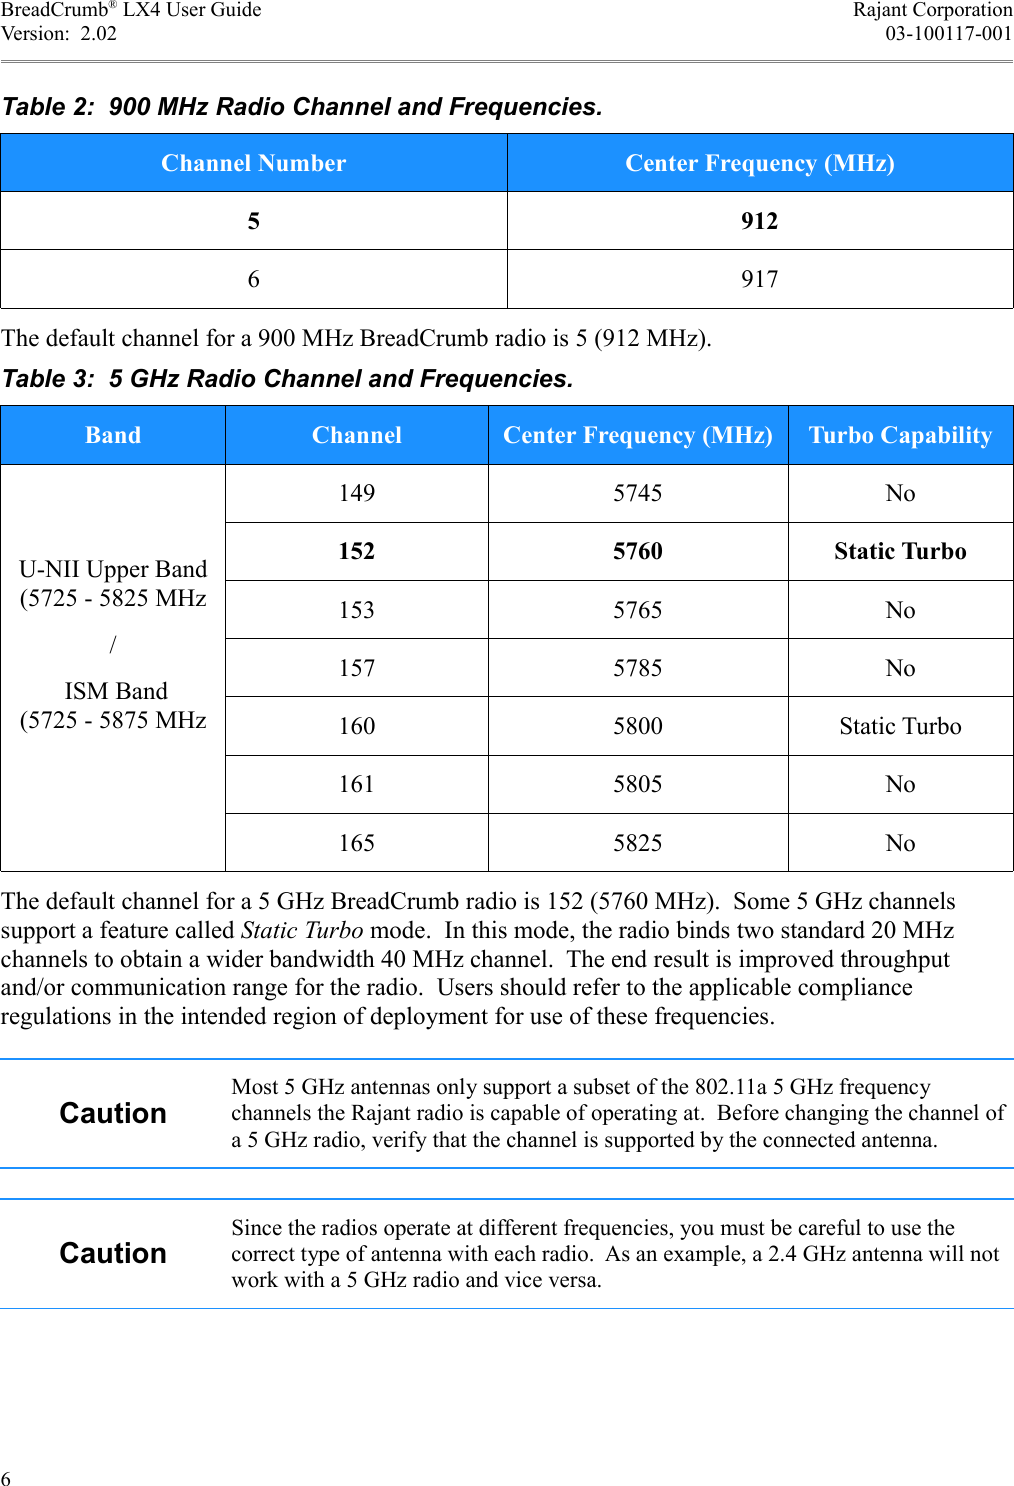 BreadCrumb® LX4 User Guide Rajant CorporationVersion:  2.02 03-100117-001Table 2:  900 MHz Radio Channel and Frequencies.Channel Number Center Frequency (MHz)5 9126 917The default channel for a 900 MHz BreadCrumb radio is 5 (912 MHz).Table 3:  5 GHz Radio Channel and Frequencies.Band Channel Center Frequency (MHz) Turbo CapabilityU-NII Upper Band (5725 - 5825 MHz/ ISM Band (5725 - 5875 MHz149 5745 No152 5760 Static Turbo153 5765 No157 5785 No160 5800 Static Turbo161 5805 No165 5825 NoThe default channel for a 5 GHz BreadCrumb radio is 152 (5760 MHz).  Some 5 GHz channels support a feature called Static Turbo mode.  In this mode, the radio binds two standard 20 MHz channels to obtain a wider bandwidth 40 MHz channel.  The end result is improved throughput and/or communication range for the radio.  Users should refer to the applicable compliance regulations in the intended region of deployment for use of these frequencies.CautionMost 5 GHz antennas only support a subset of the 802.11a 5 GHz frequency channels the Rajant radio is capable of operating at.  Before changing the channel of a 5 GHz radio, verify that the channel is supported by the connected antenna.CautionSince the radios operate at different frequencies, you must be careful to use the correct type of antenna with each radio.  As an example, a 2.4 GHz antenna will not work with a 5 GHz radio and vice versa.6